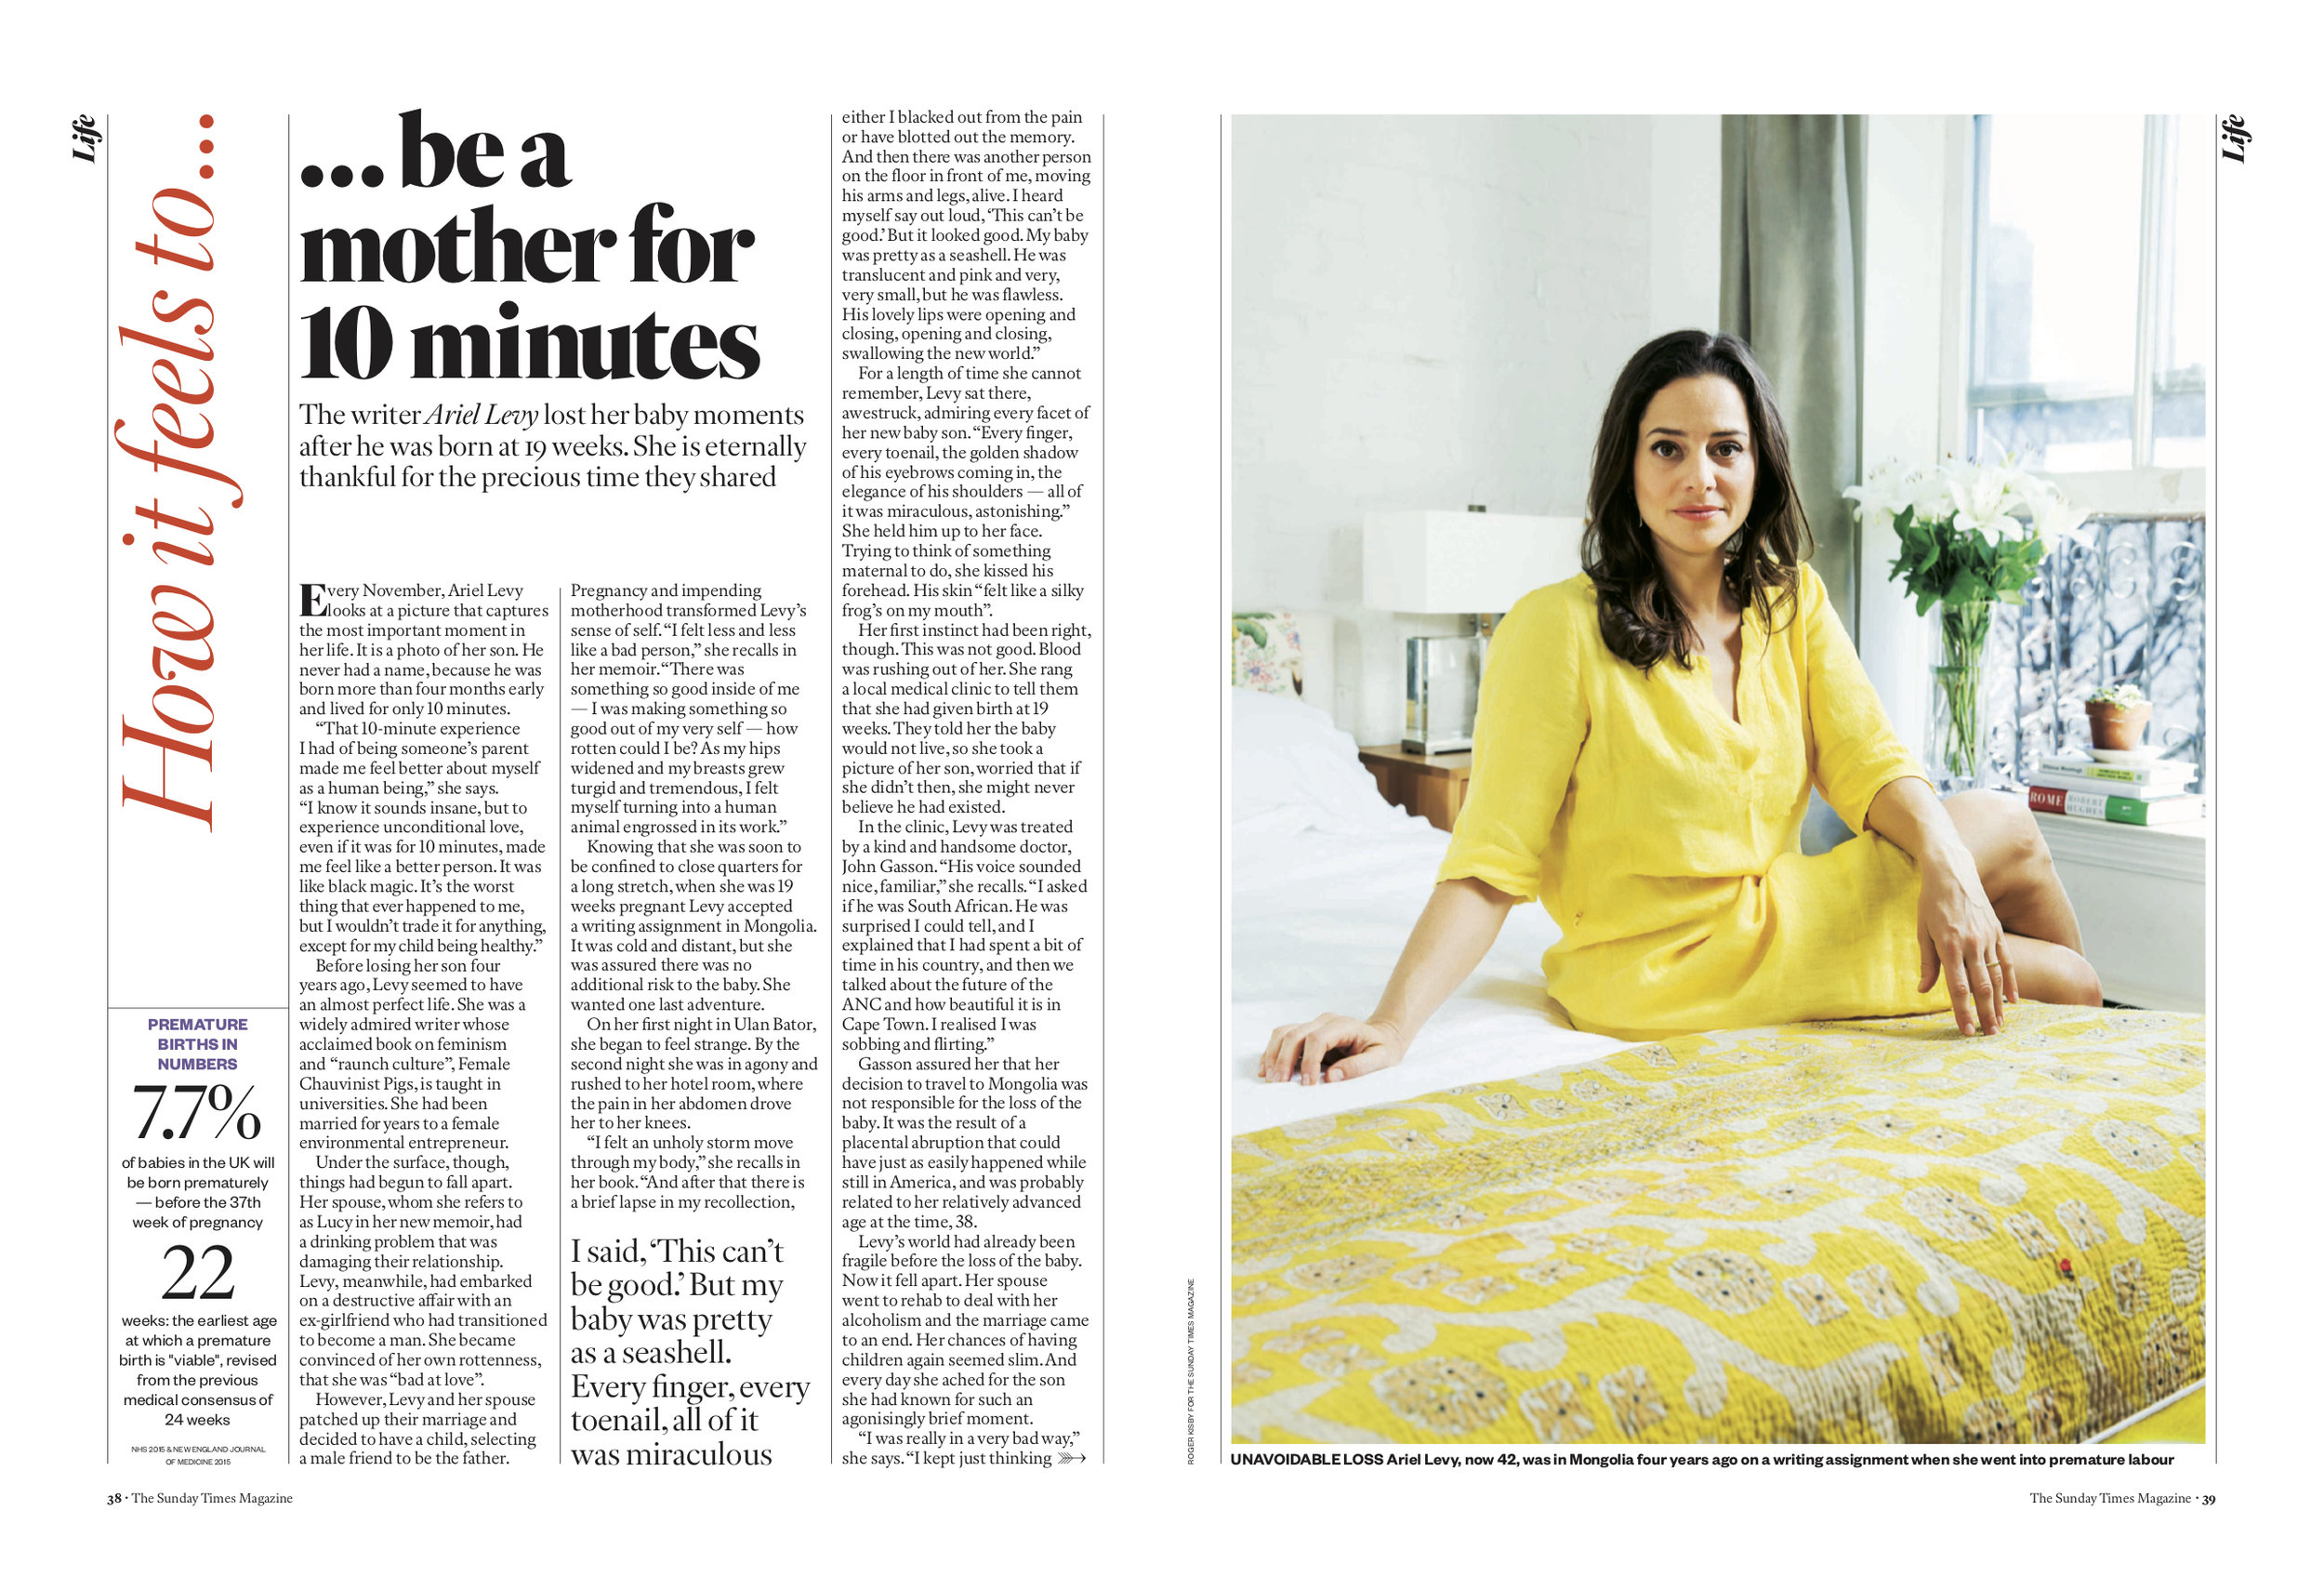  Ariel Levy for The Sunday Times Magazine 